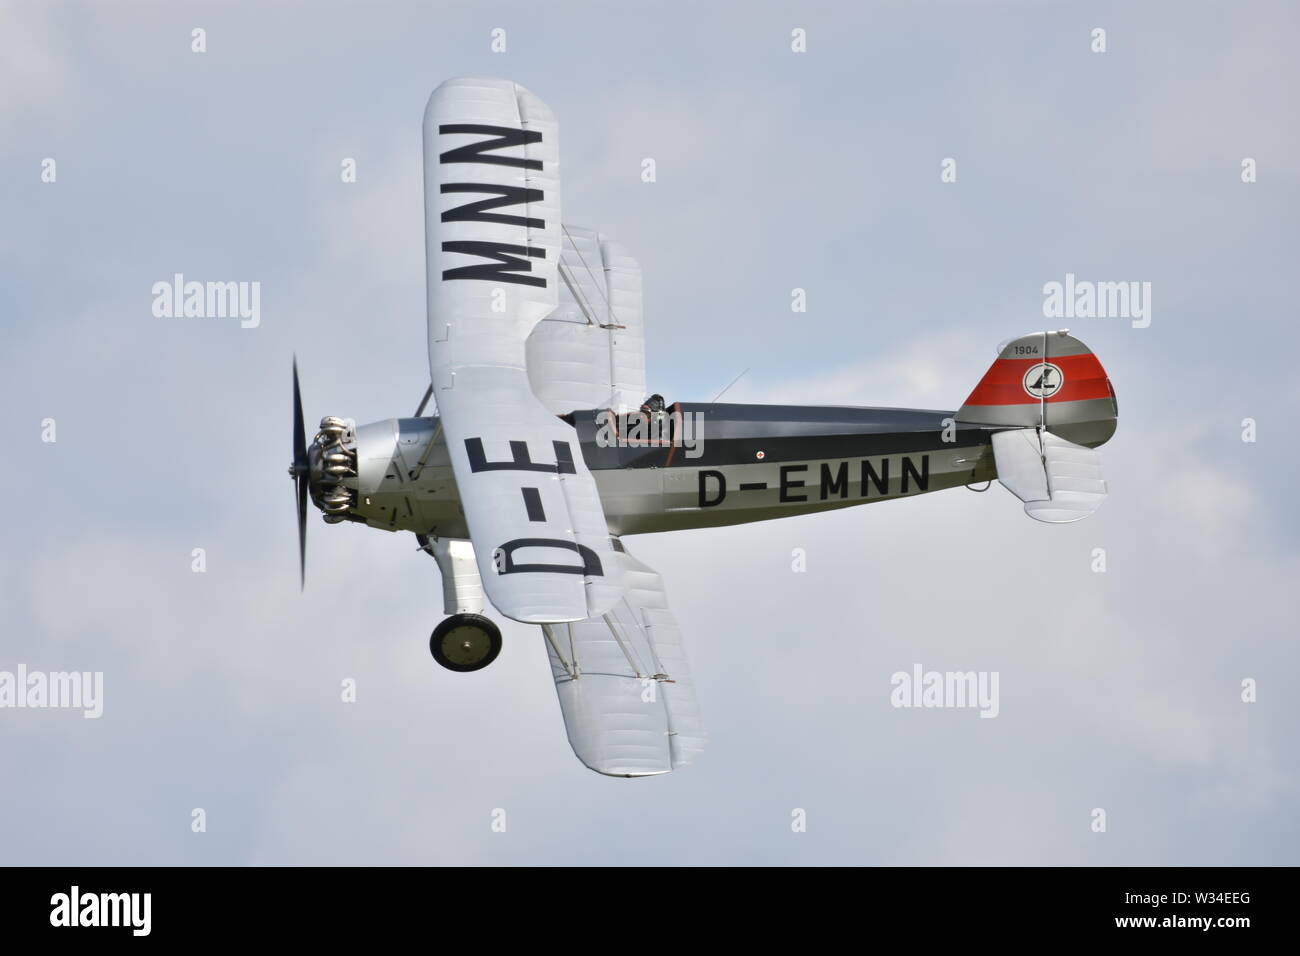 Focke-Wulf Fw 44 Shuttleworth Collection Military Air Show July 2019 Stock Photo